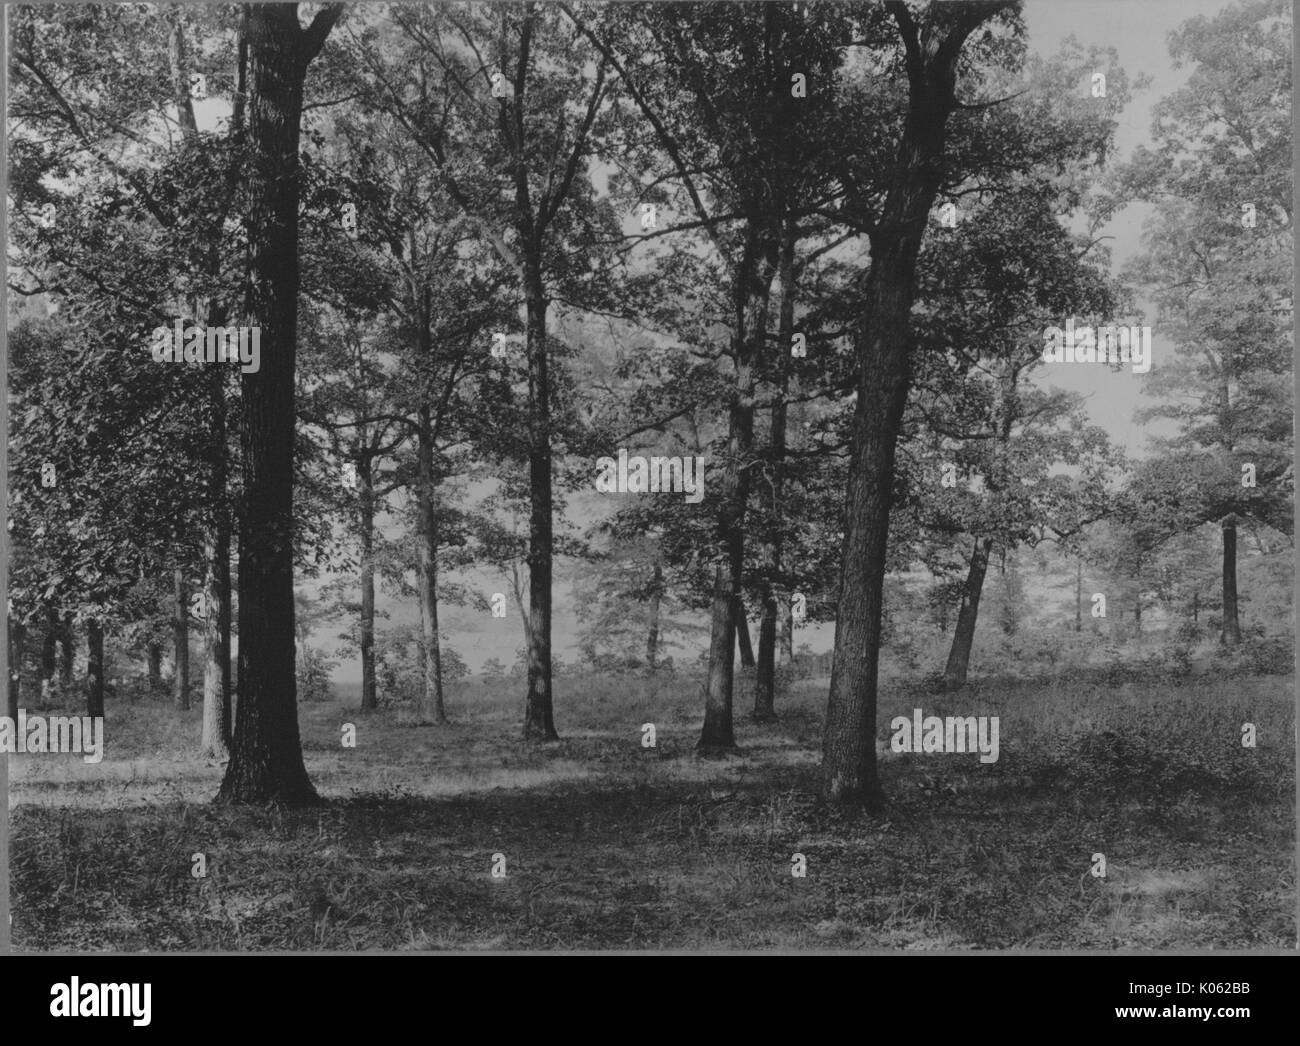 Unoccupied land near Roland Park and Guilford, a view of many scattered trees, United States, 1910. This image is from a series documenting the construction and sale of homes in the Roland Park/Guilford neighborhood of Baltimore, a streetcar suburb and one of the first planned communities in the United States. Stock Photo